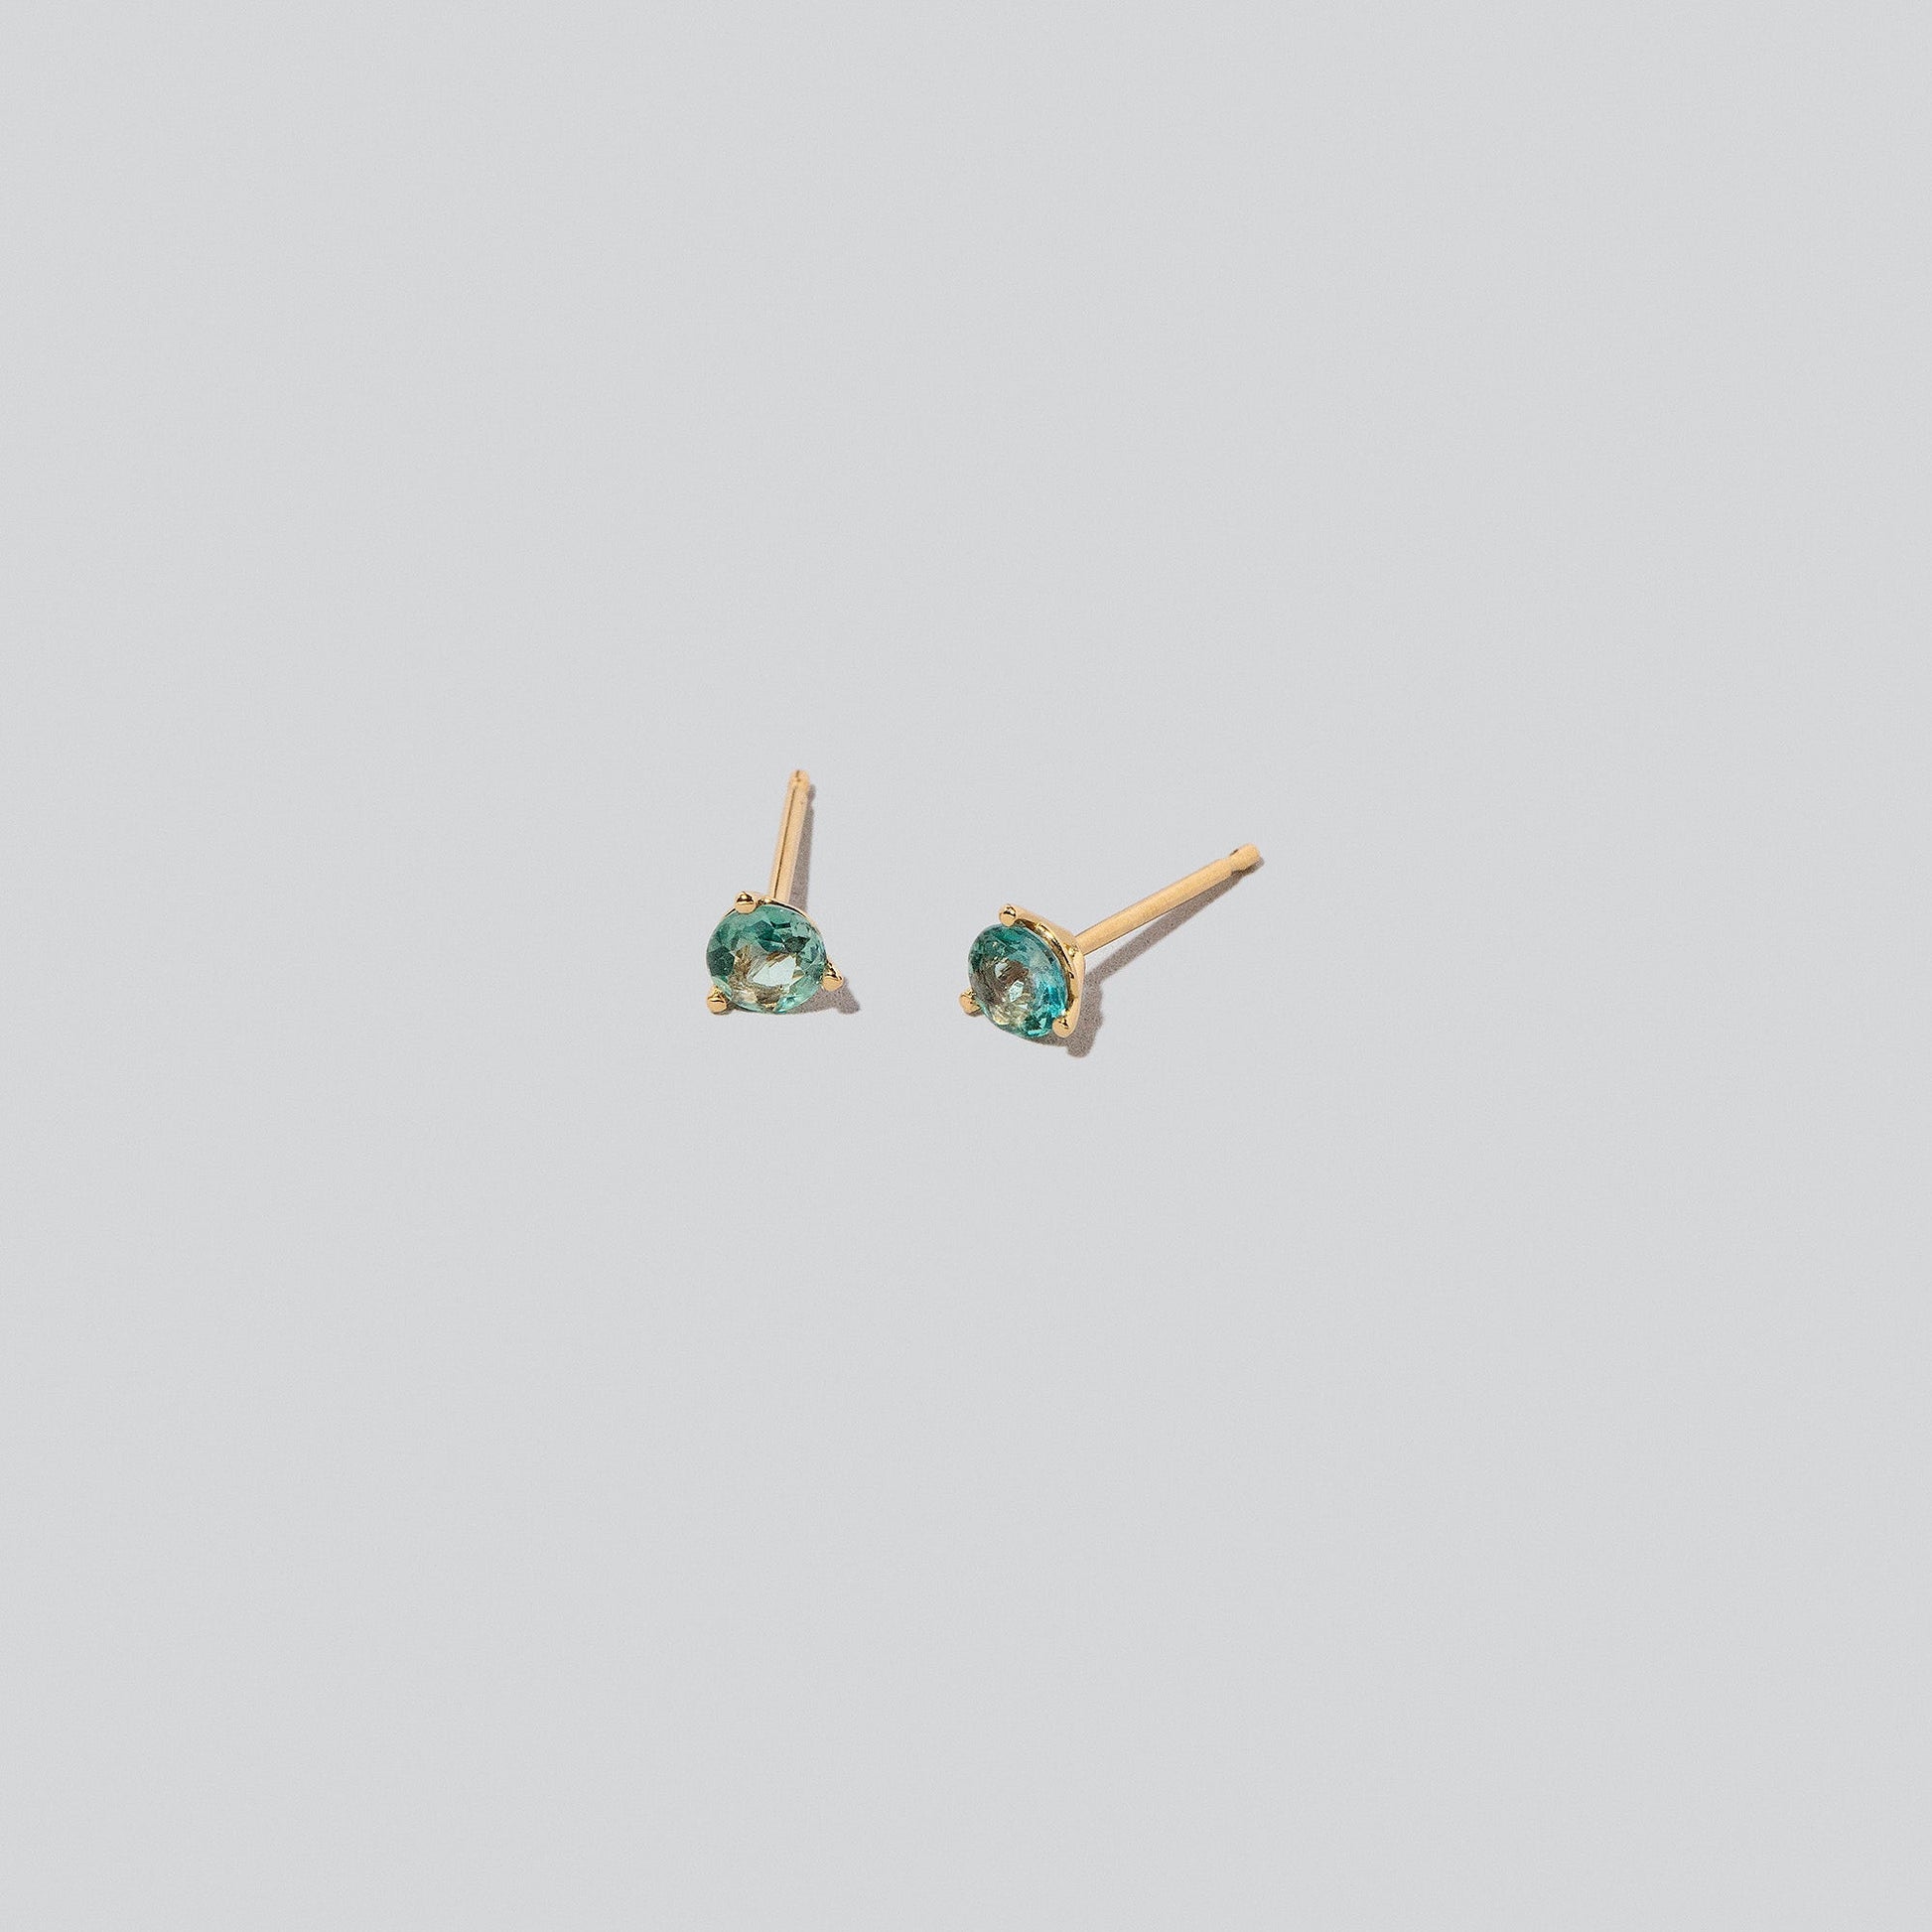 Martini Stud Earrings on light colored background.